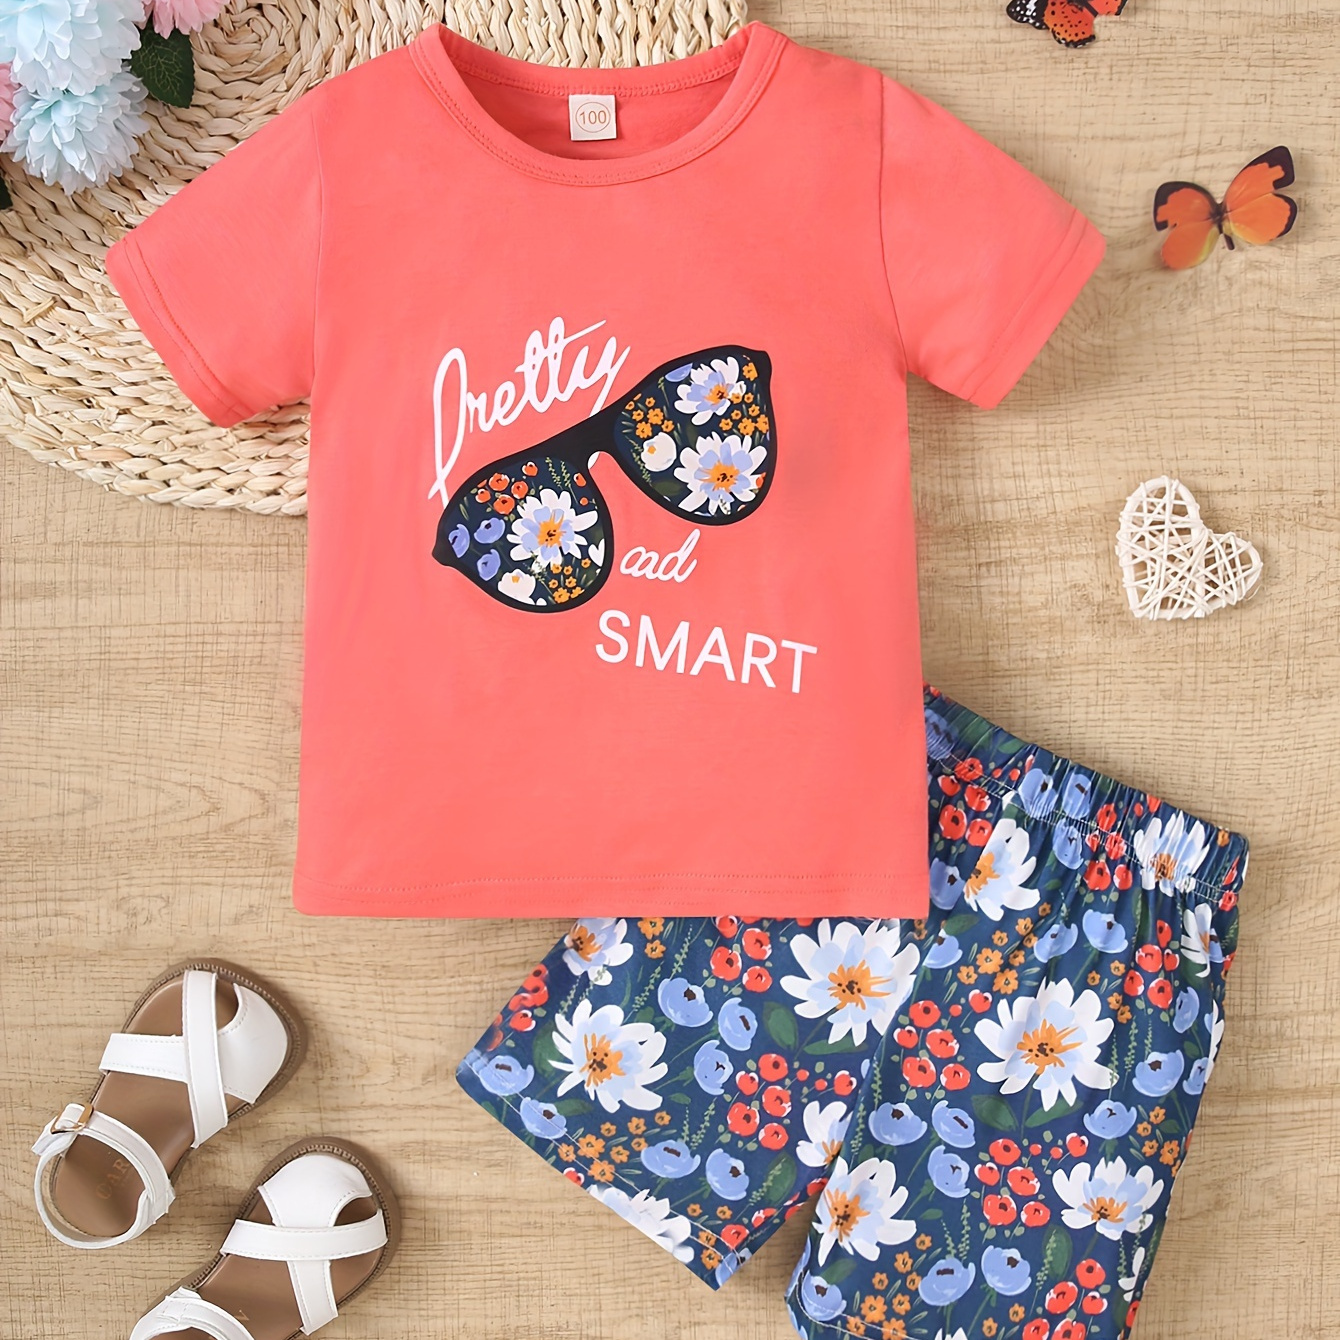 

Baby's Cartoon Sunglasses Print 2pcs Outfit, "pretty And Smart" Print T-shirt & Flower Full Print Shorts Set, Toddler & Infant Girl's Clothes For Summer